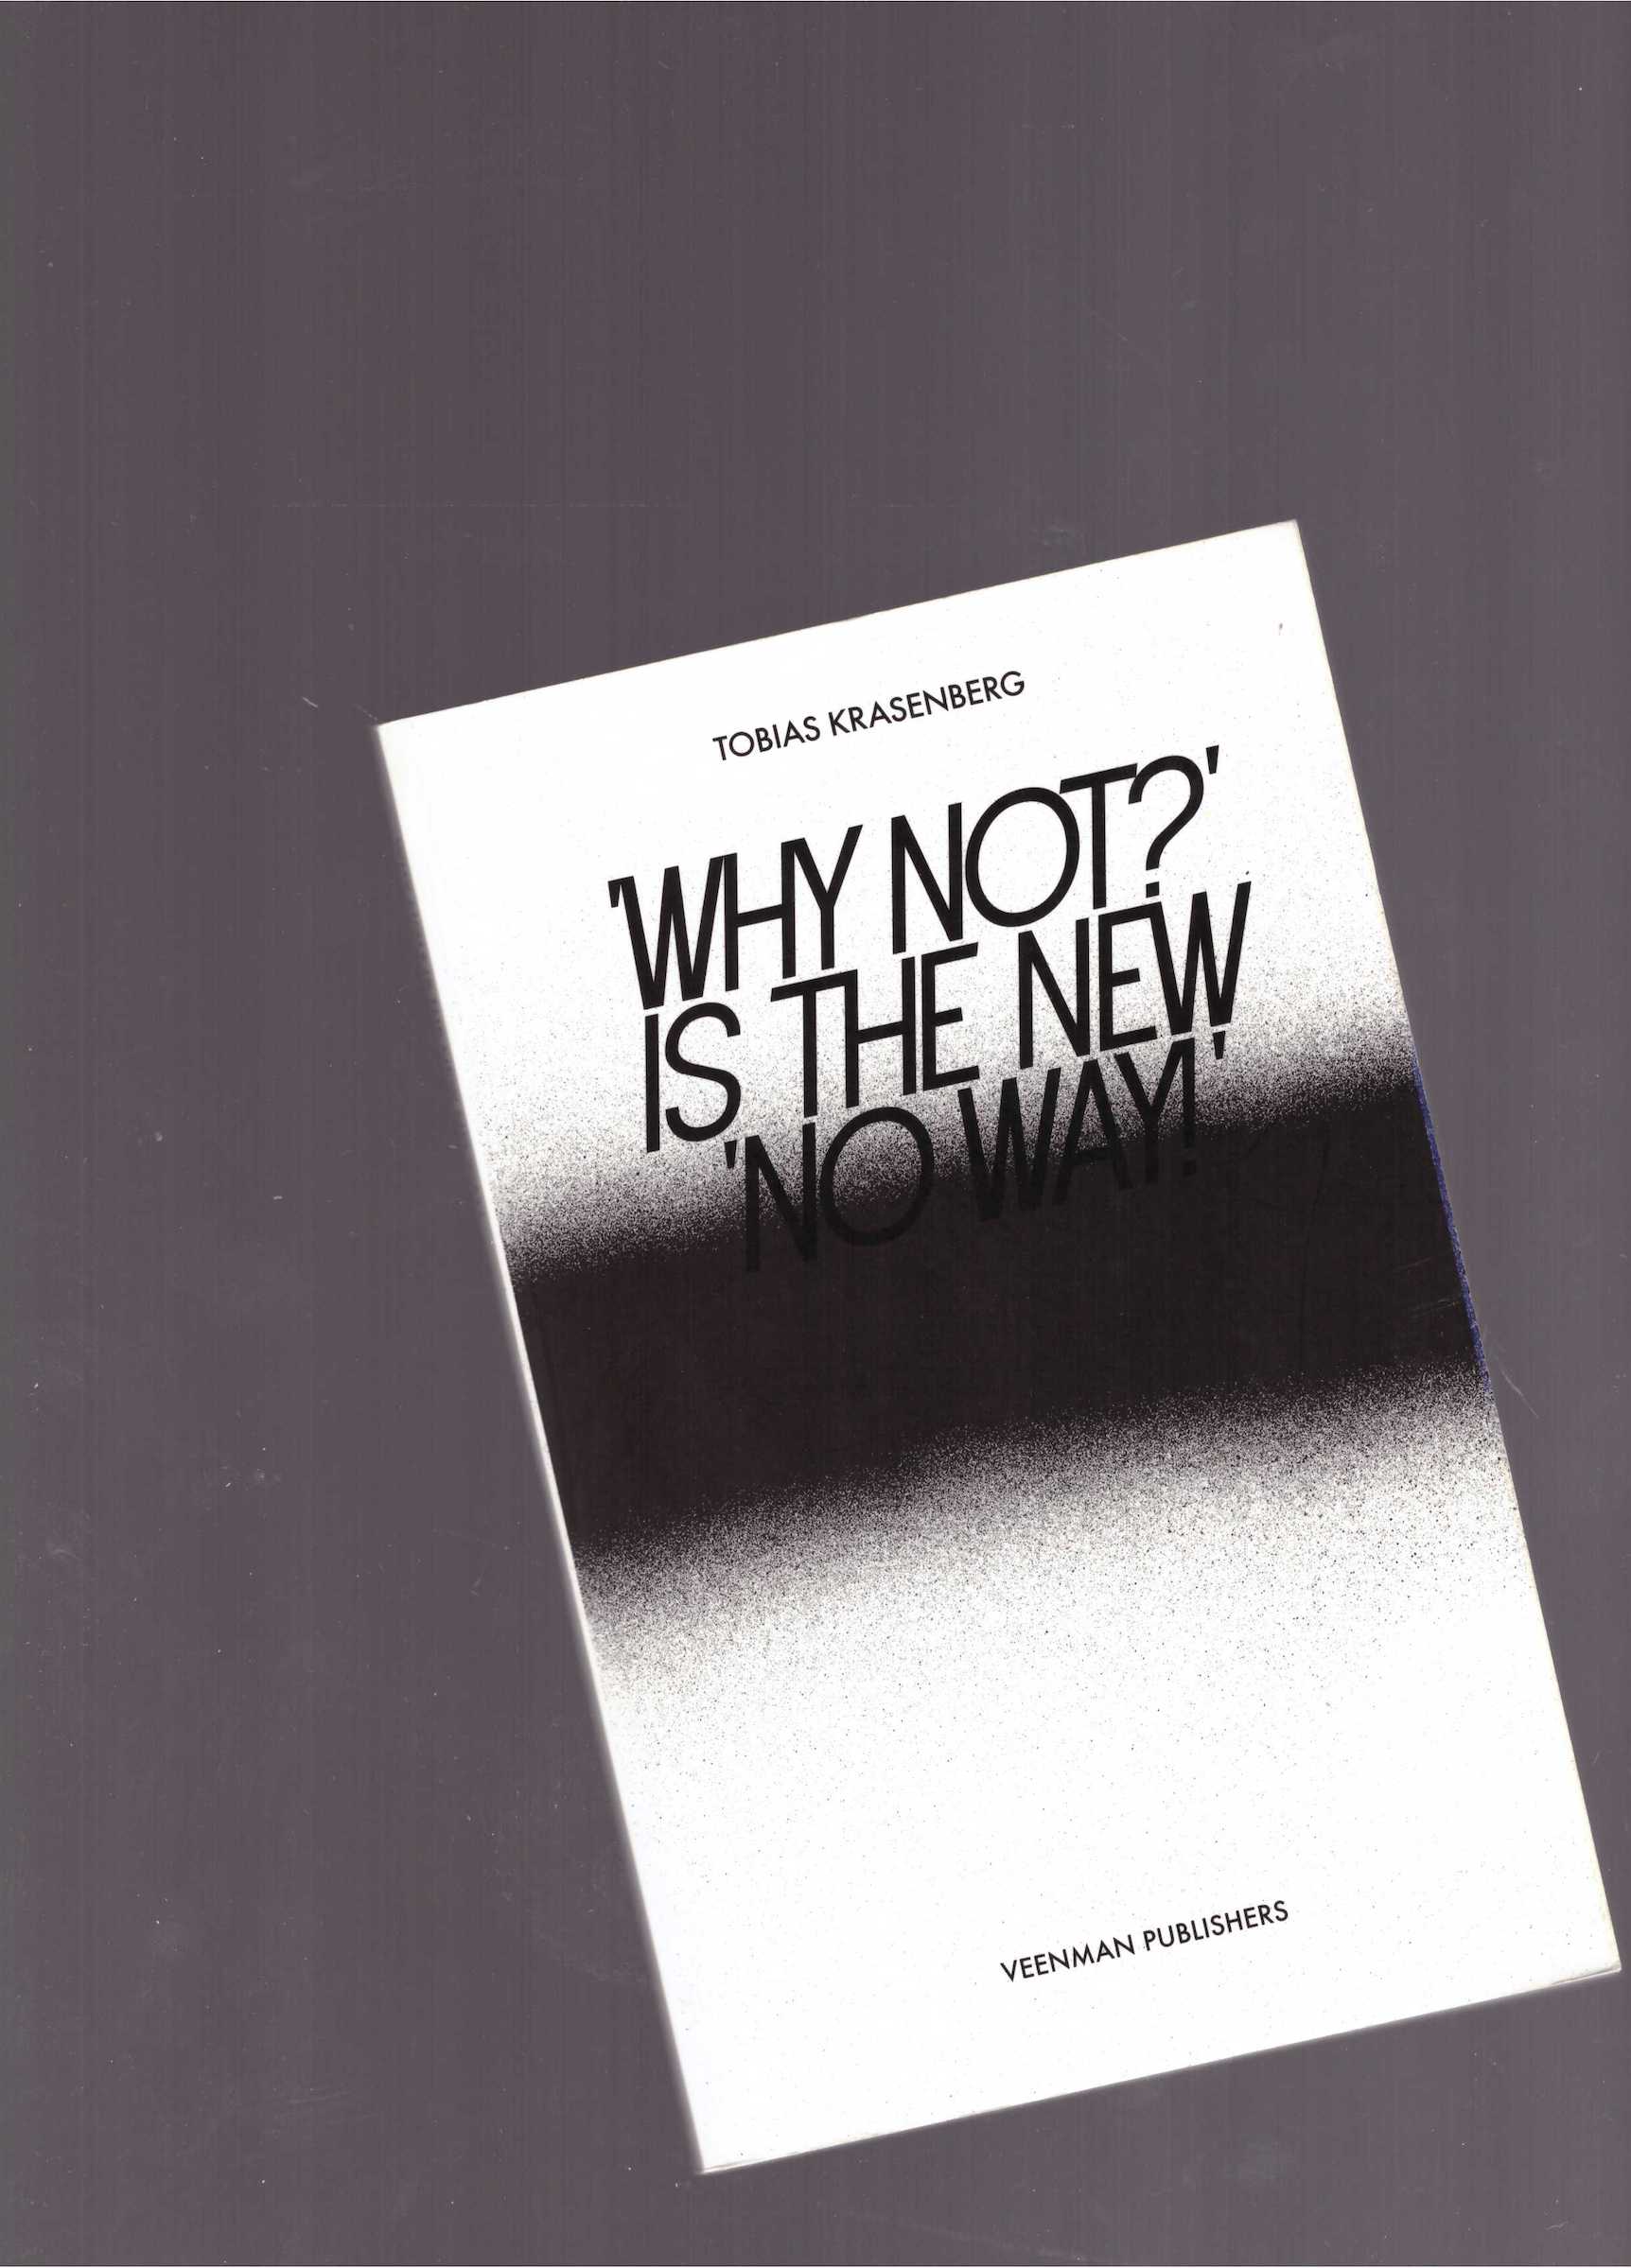 KRASENBERG, Tobias - ‘Why not?’ Is the new ‘No Way’